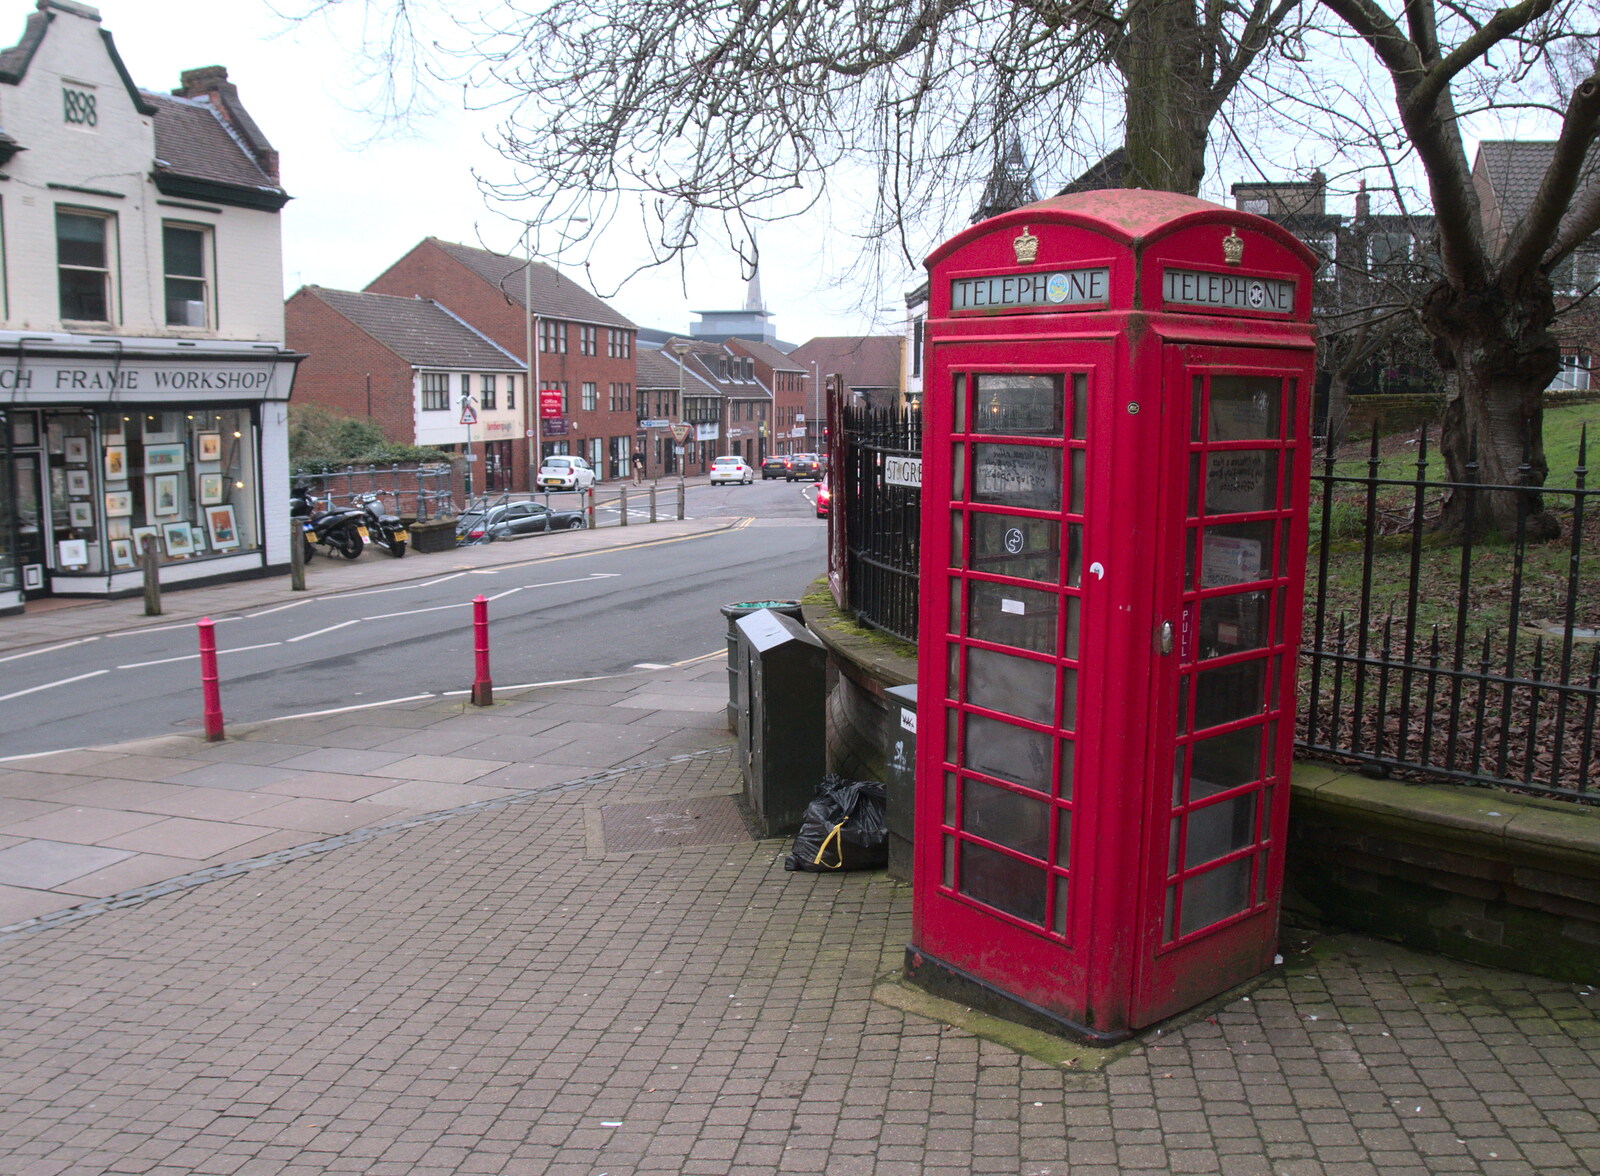 K6 phonebox on St. Gregory's Alley from A Couple of Trips to Norwich, Norfolk - 31st March 2018